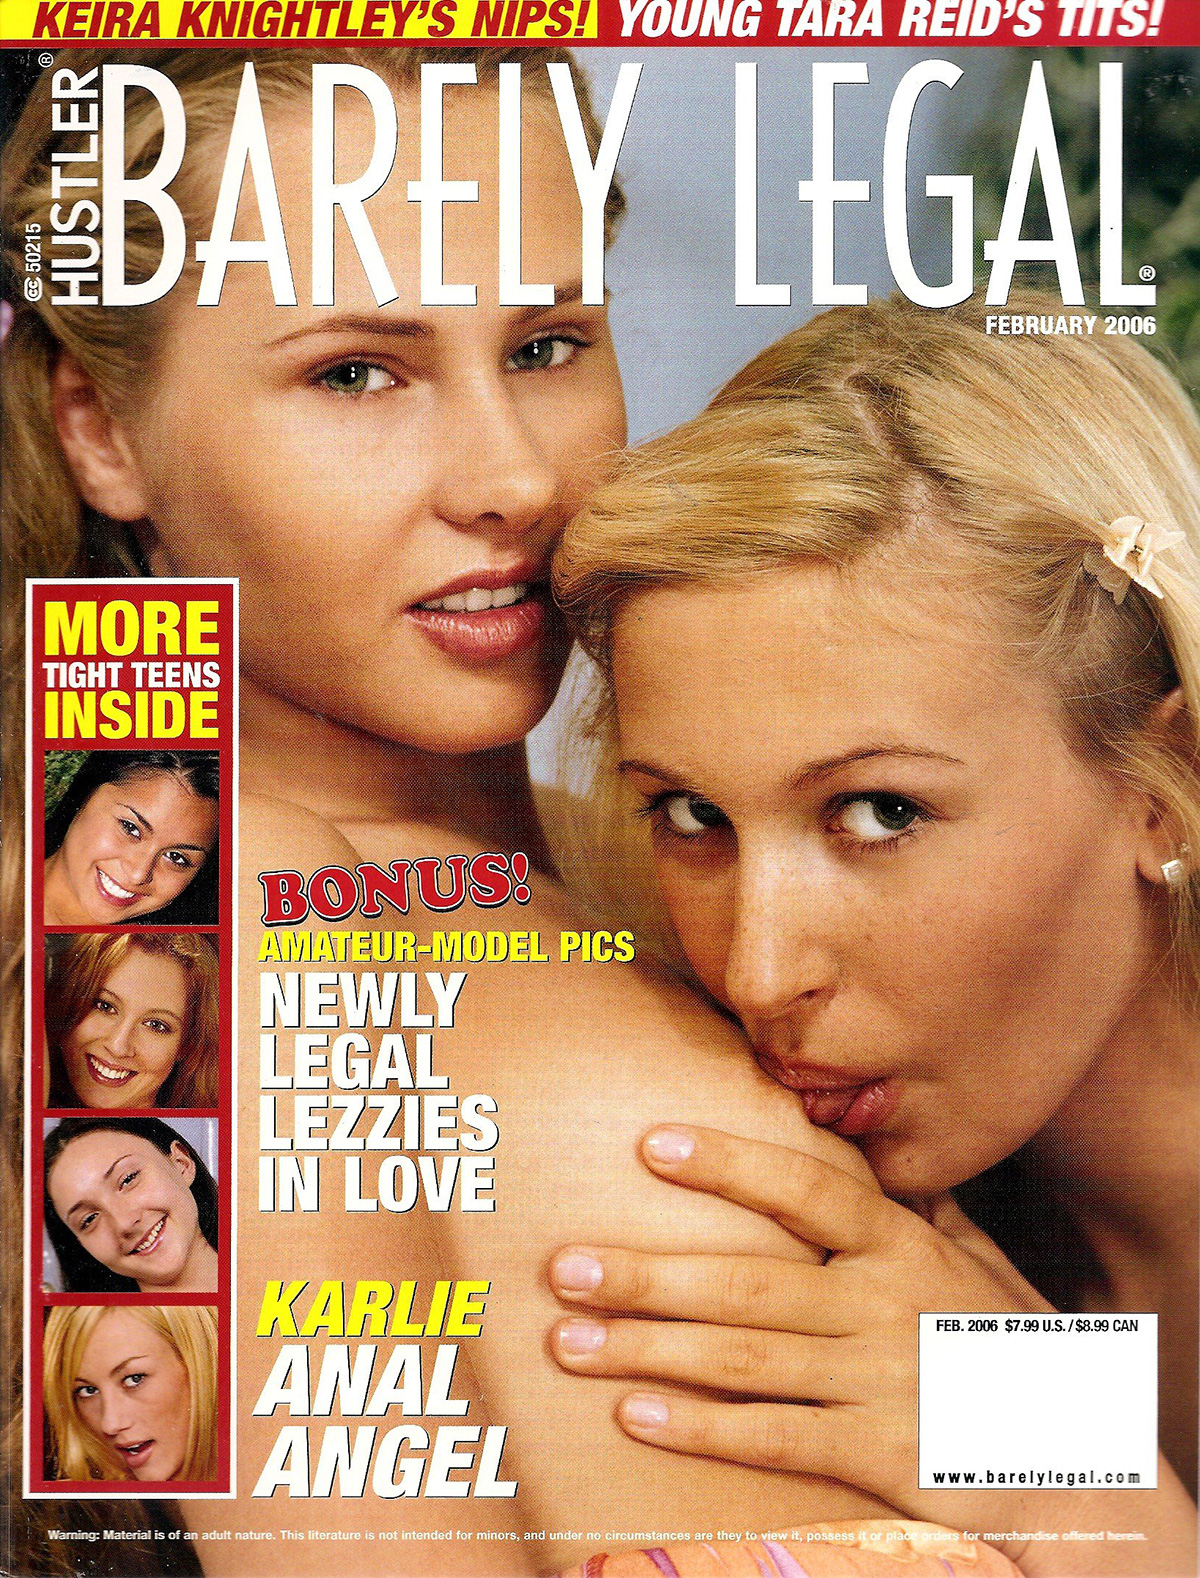 Barely Legal February 2006 magazine back issue Barely Legal magizine back copy Barely Legal February 2006 Adult Magazine Back Issue Published by Hustler. Magazines Dedicated to Young Teenage Girls Who Just Attained Legal Age. Covergirl Gillian & Deanna Photographed by Markham.